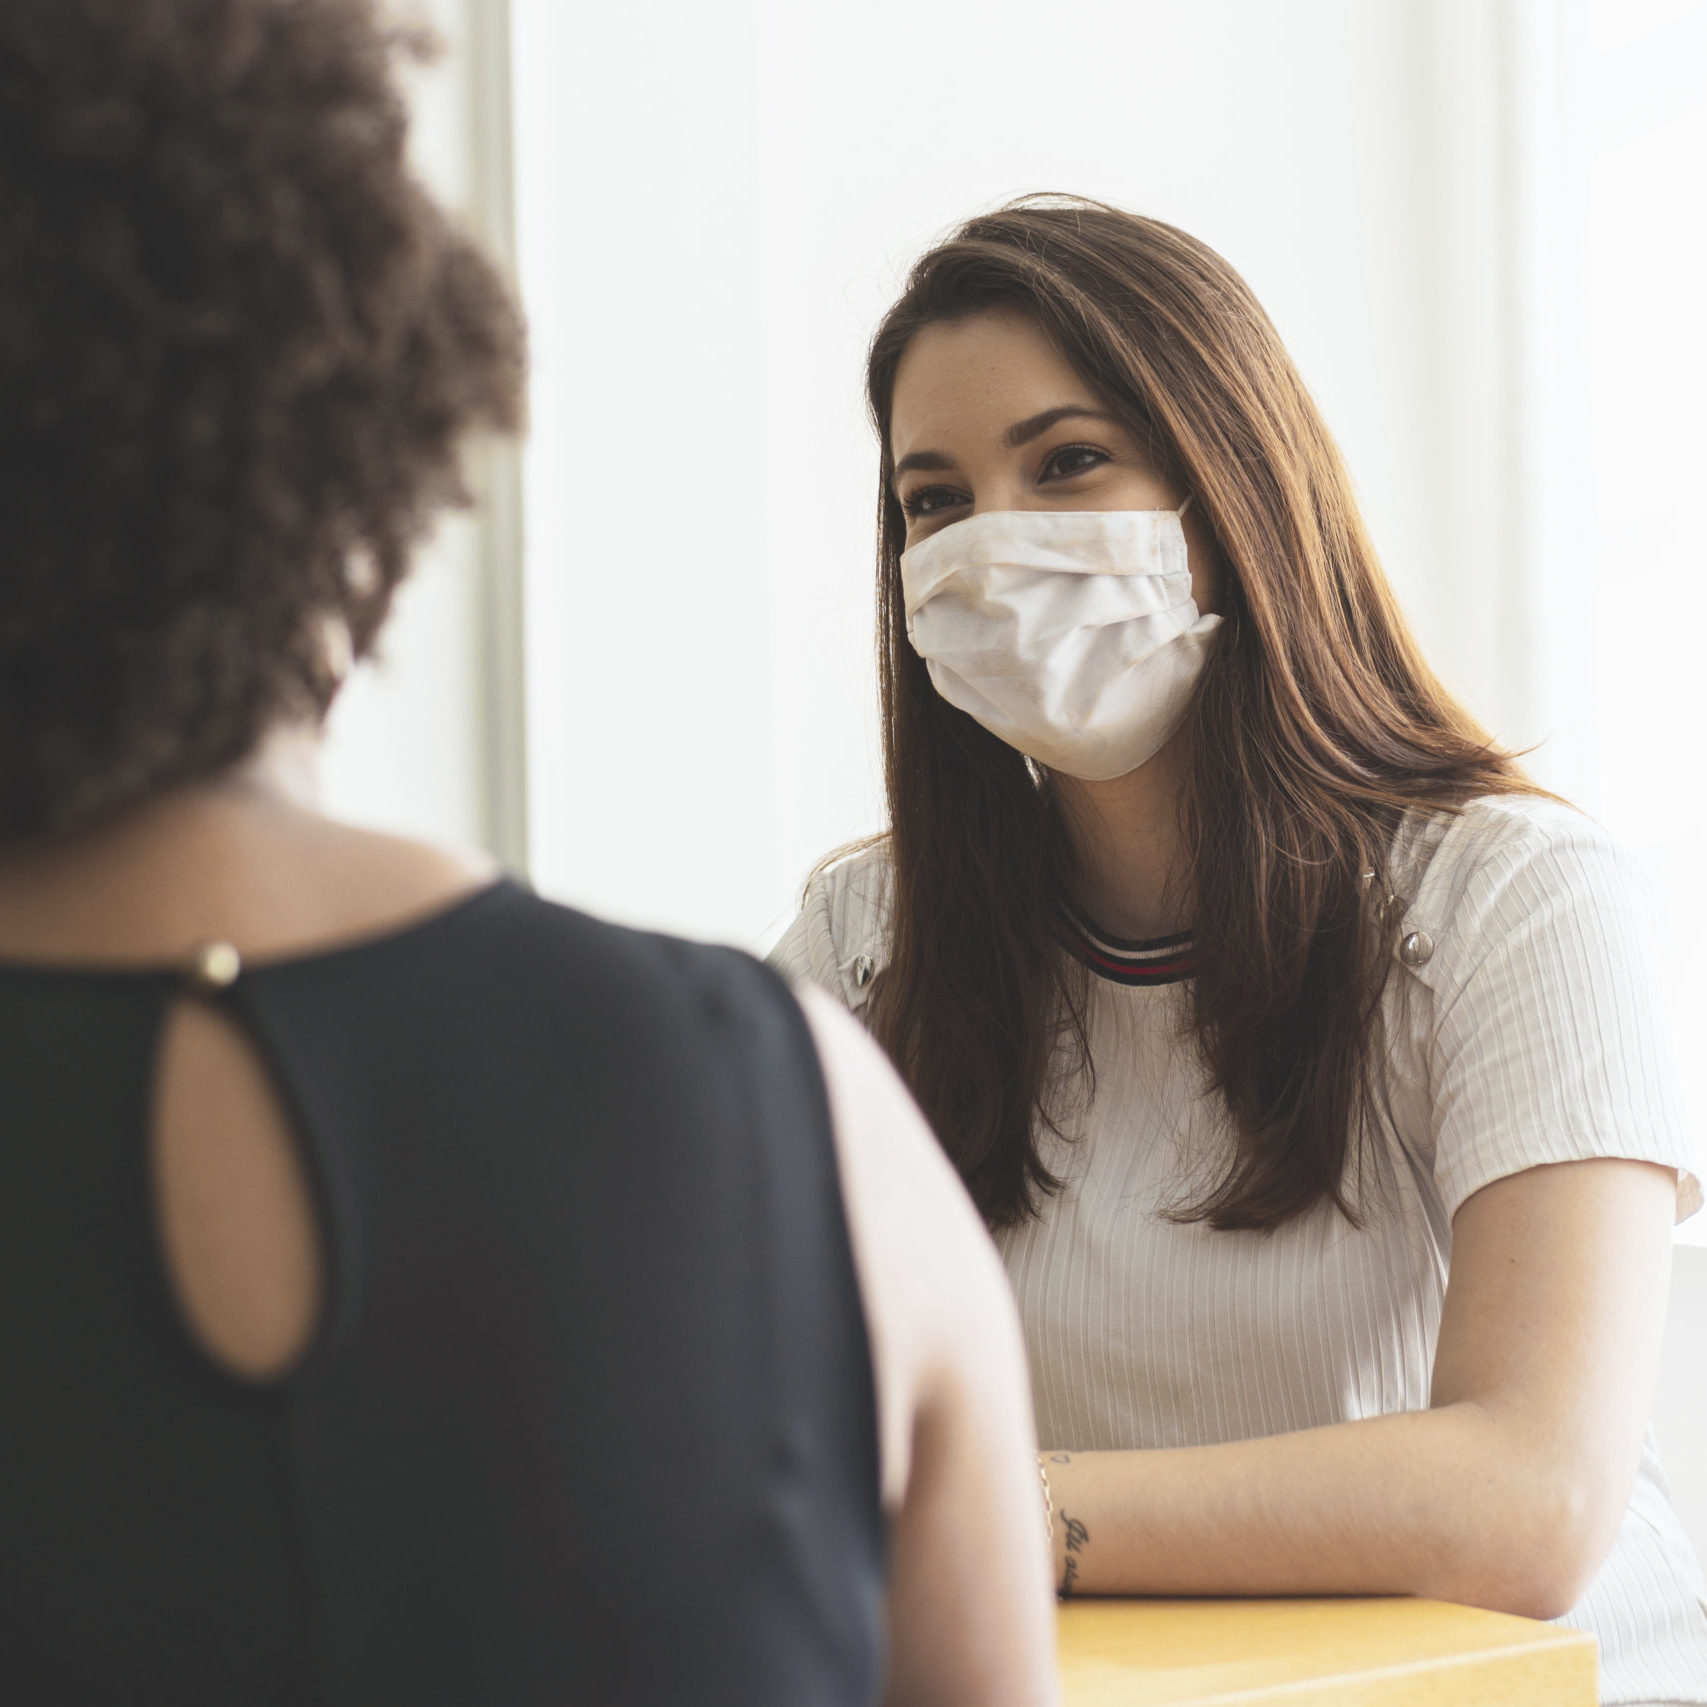 Two young women talking in an office wearing a protective face mask.